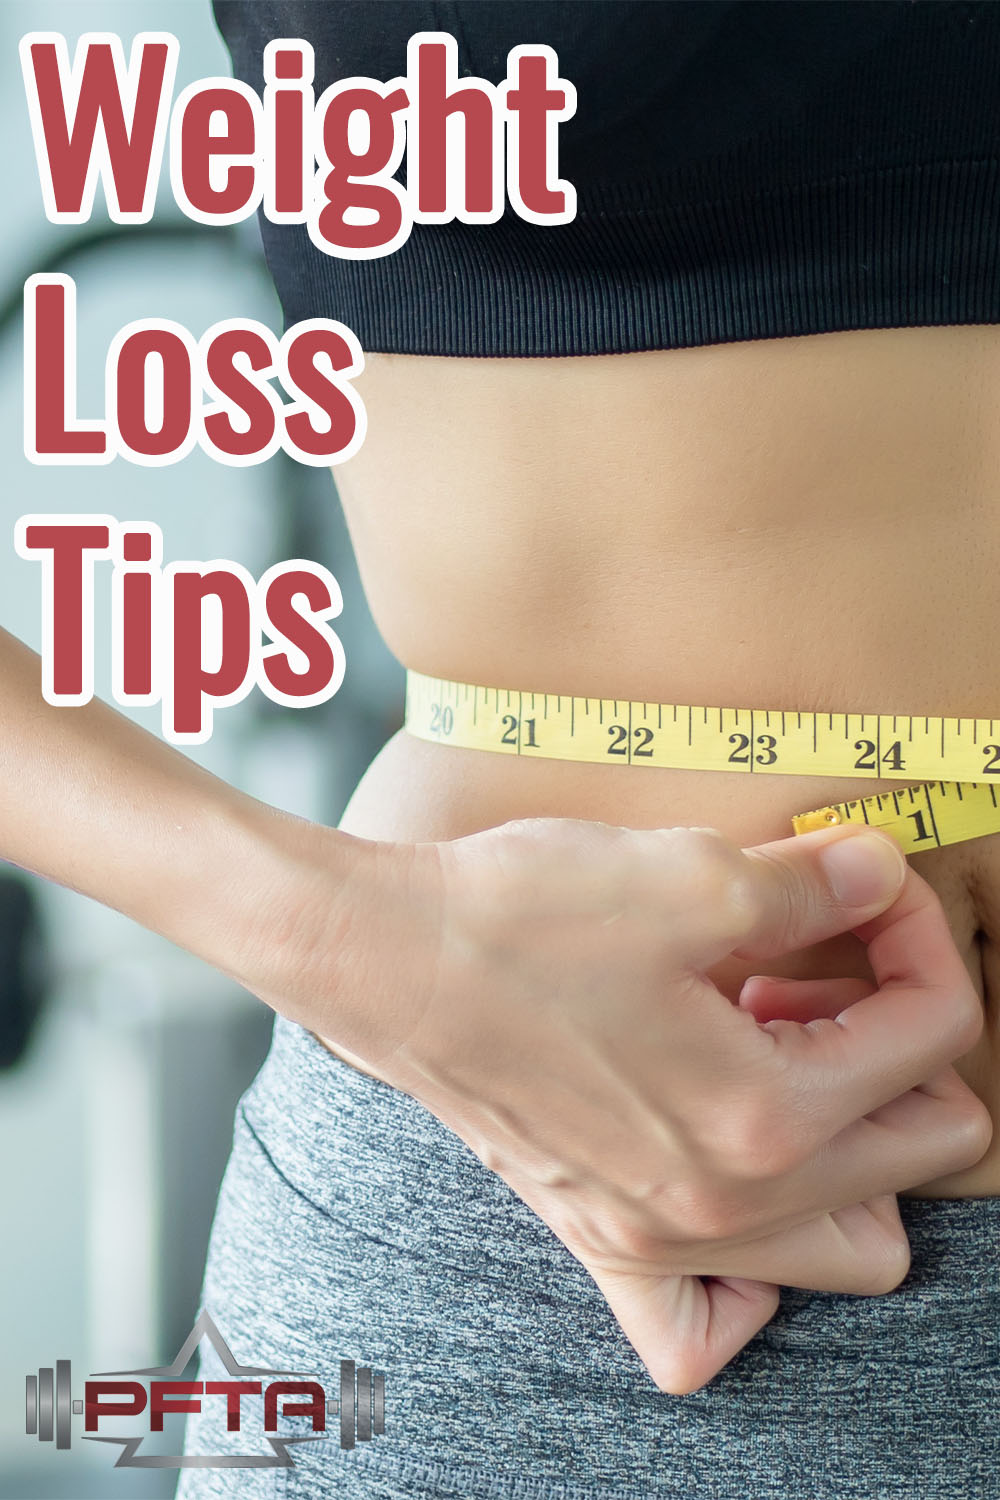 Pin on weight lose tips